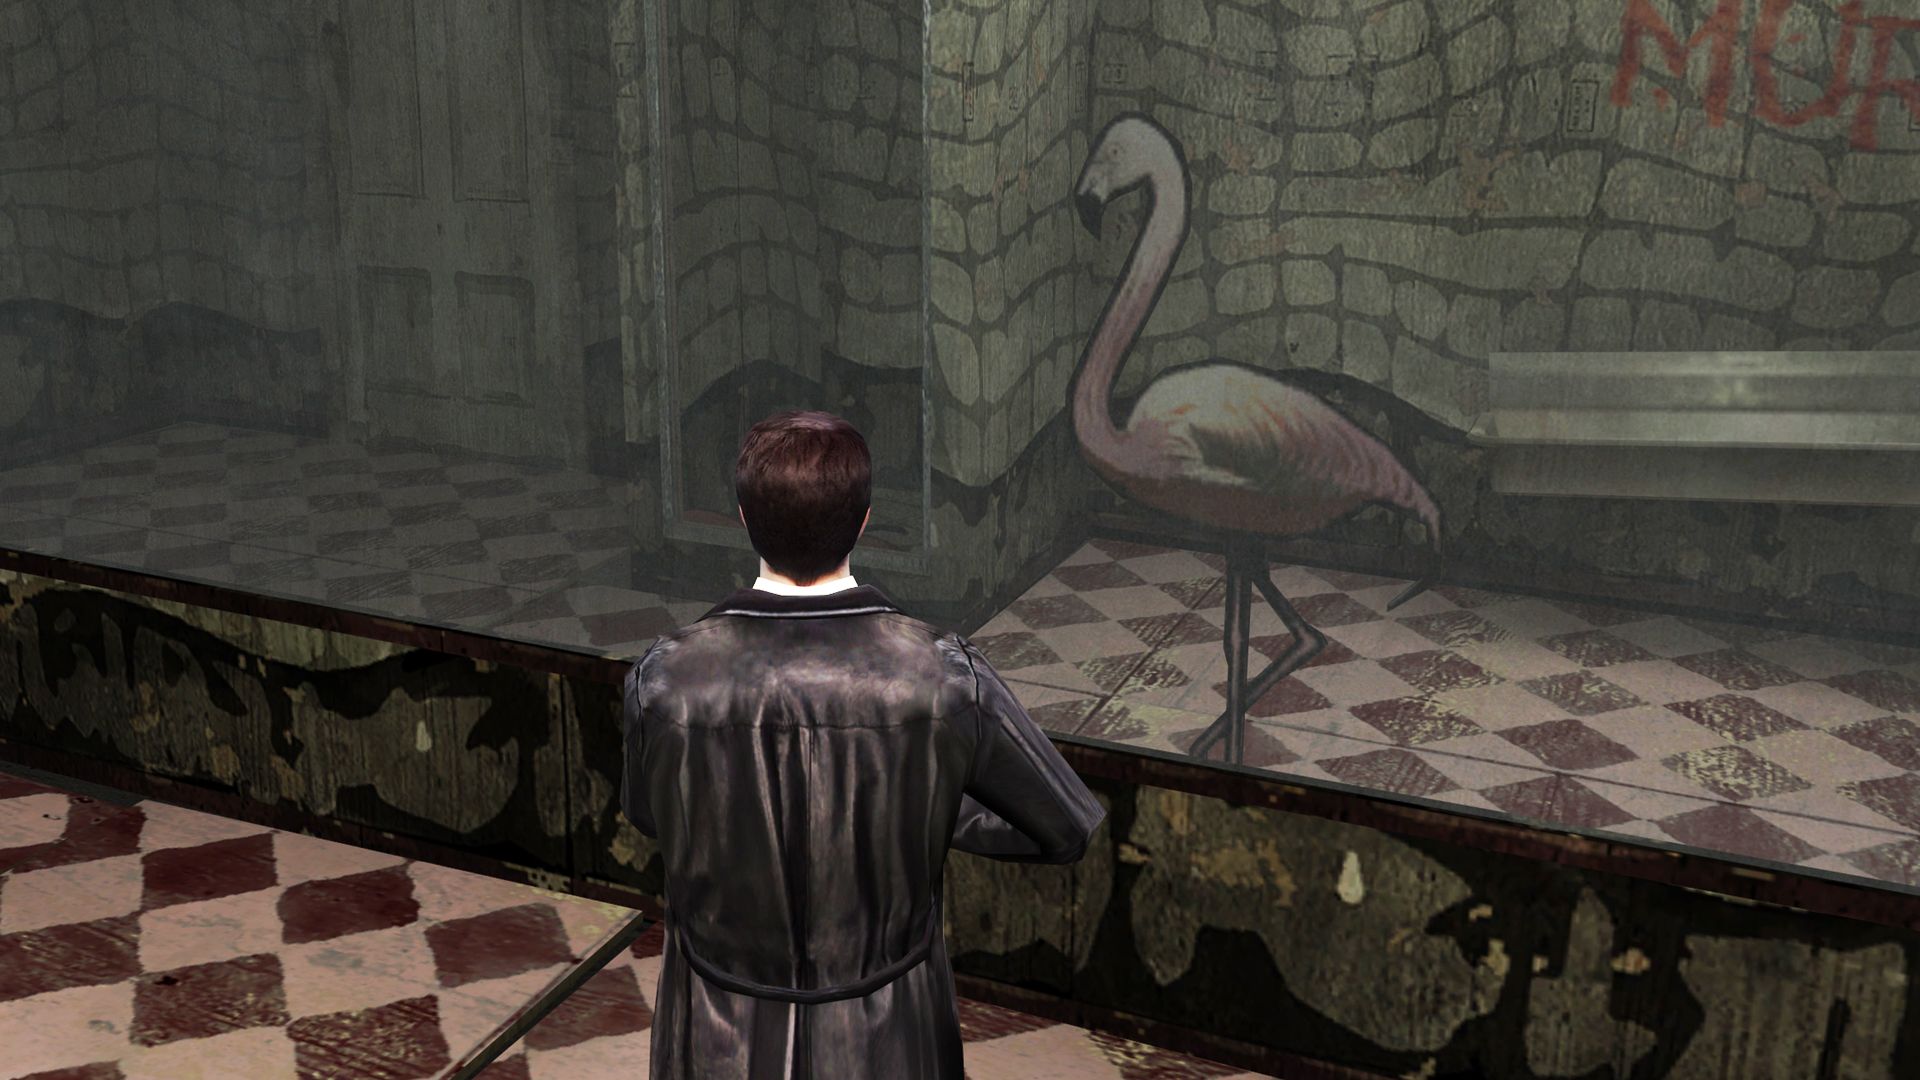 The Freaky Funhouse Level In Max Payne 2 Is Everything I Love